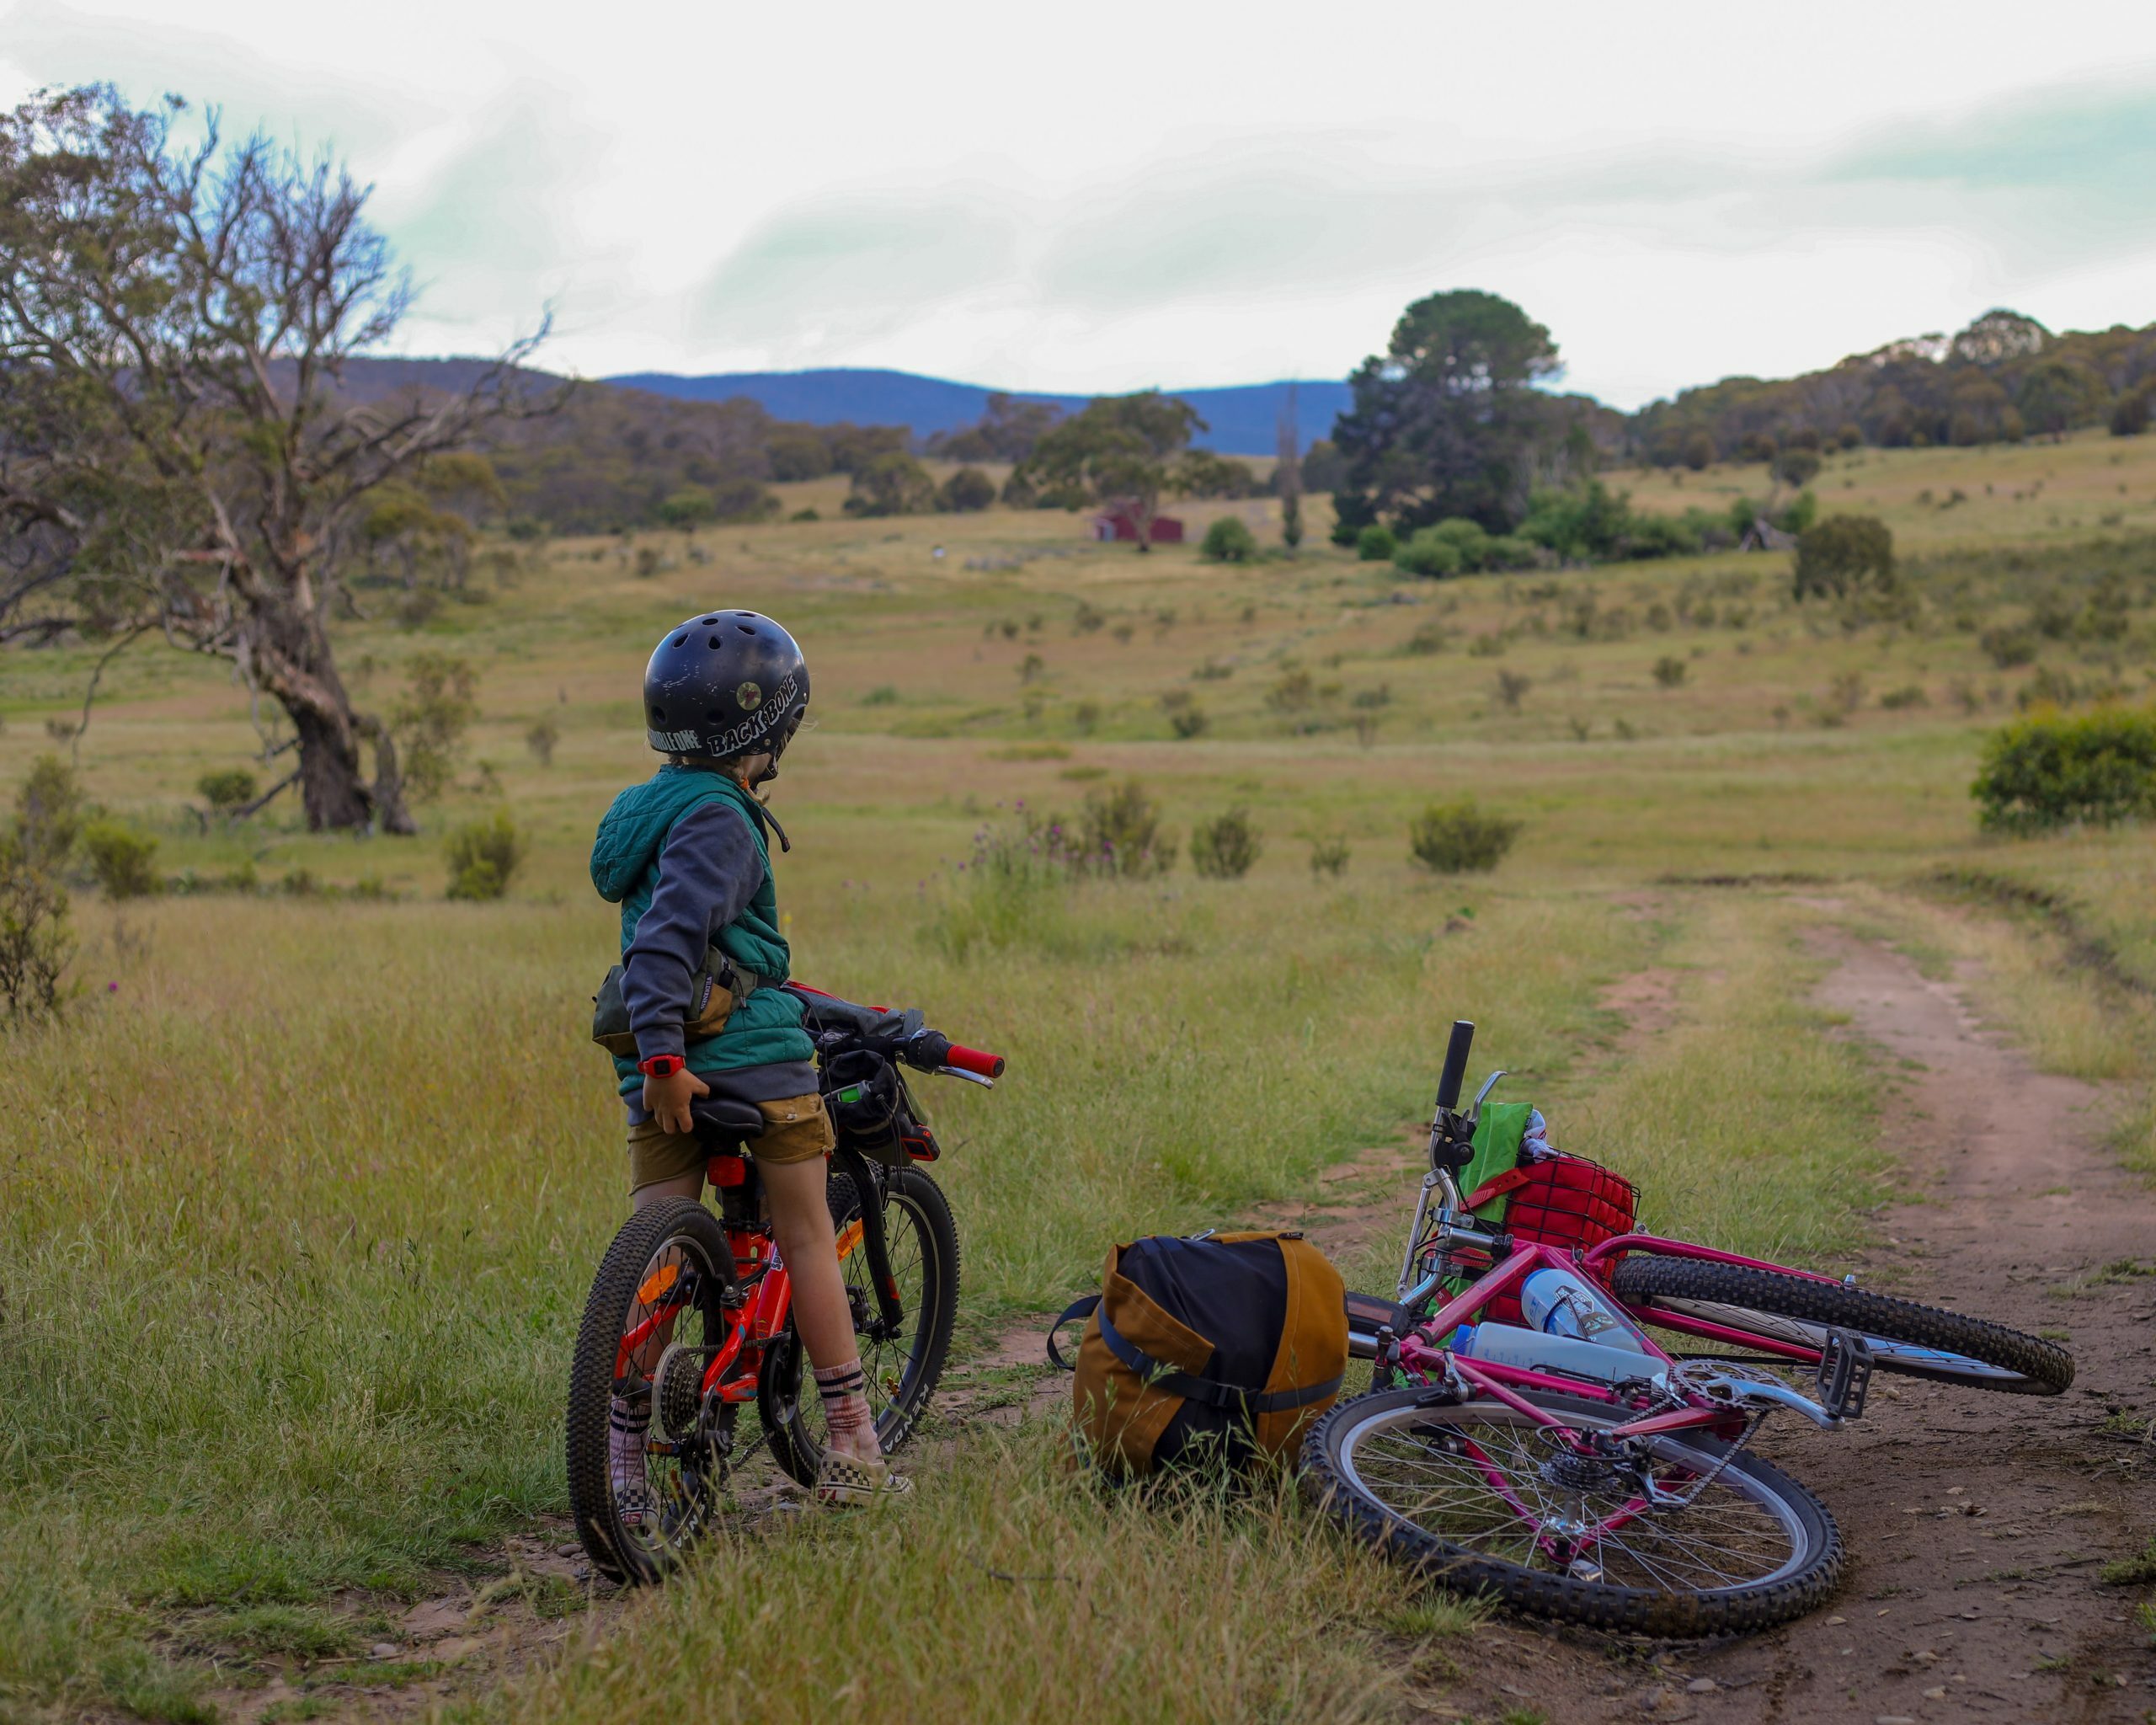 Bikepacking with a six year old by Mattie Gould